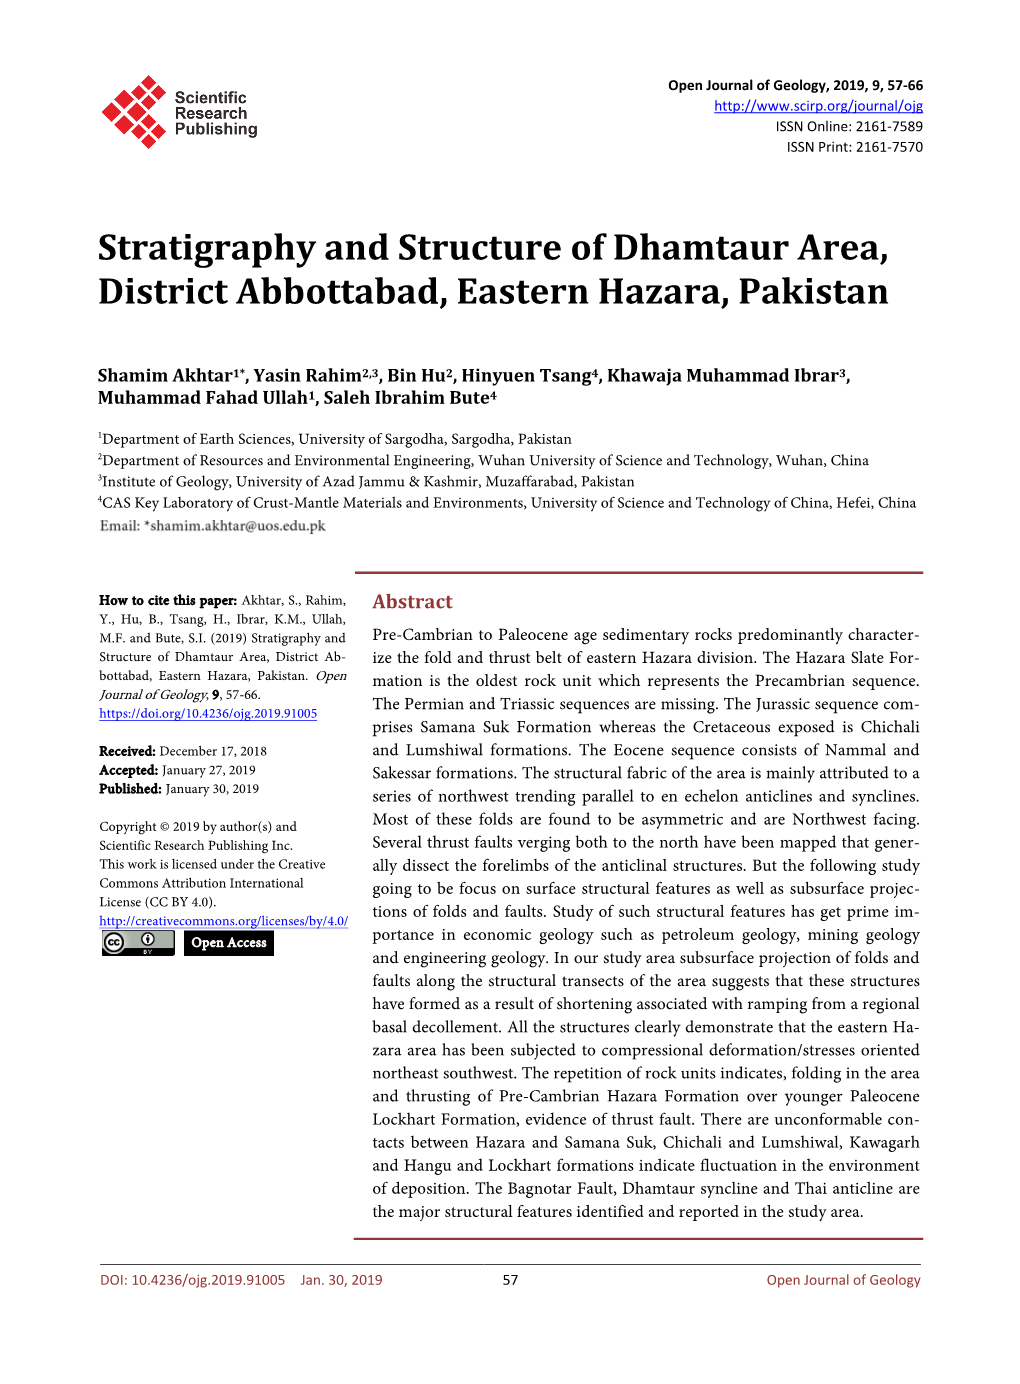 Stratigraphy and Structure of Dhamtaur Area, District Abbottabad, Eastern Hazara, Pakistan